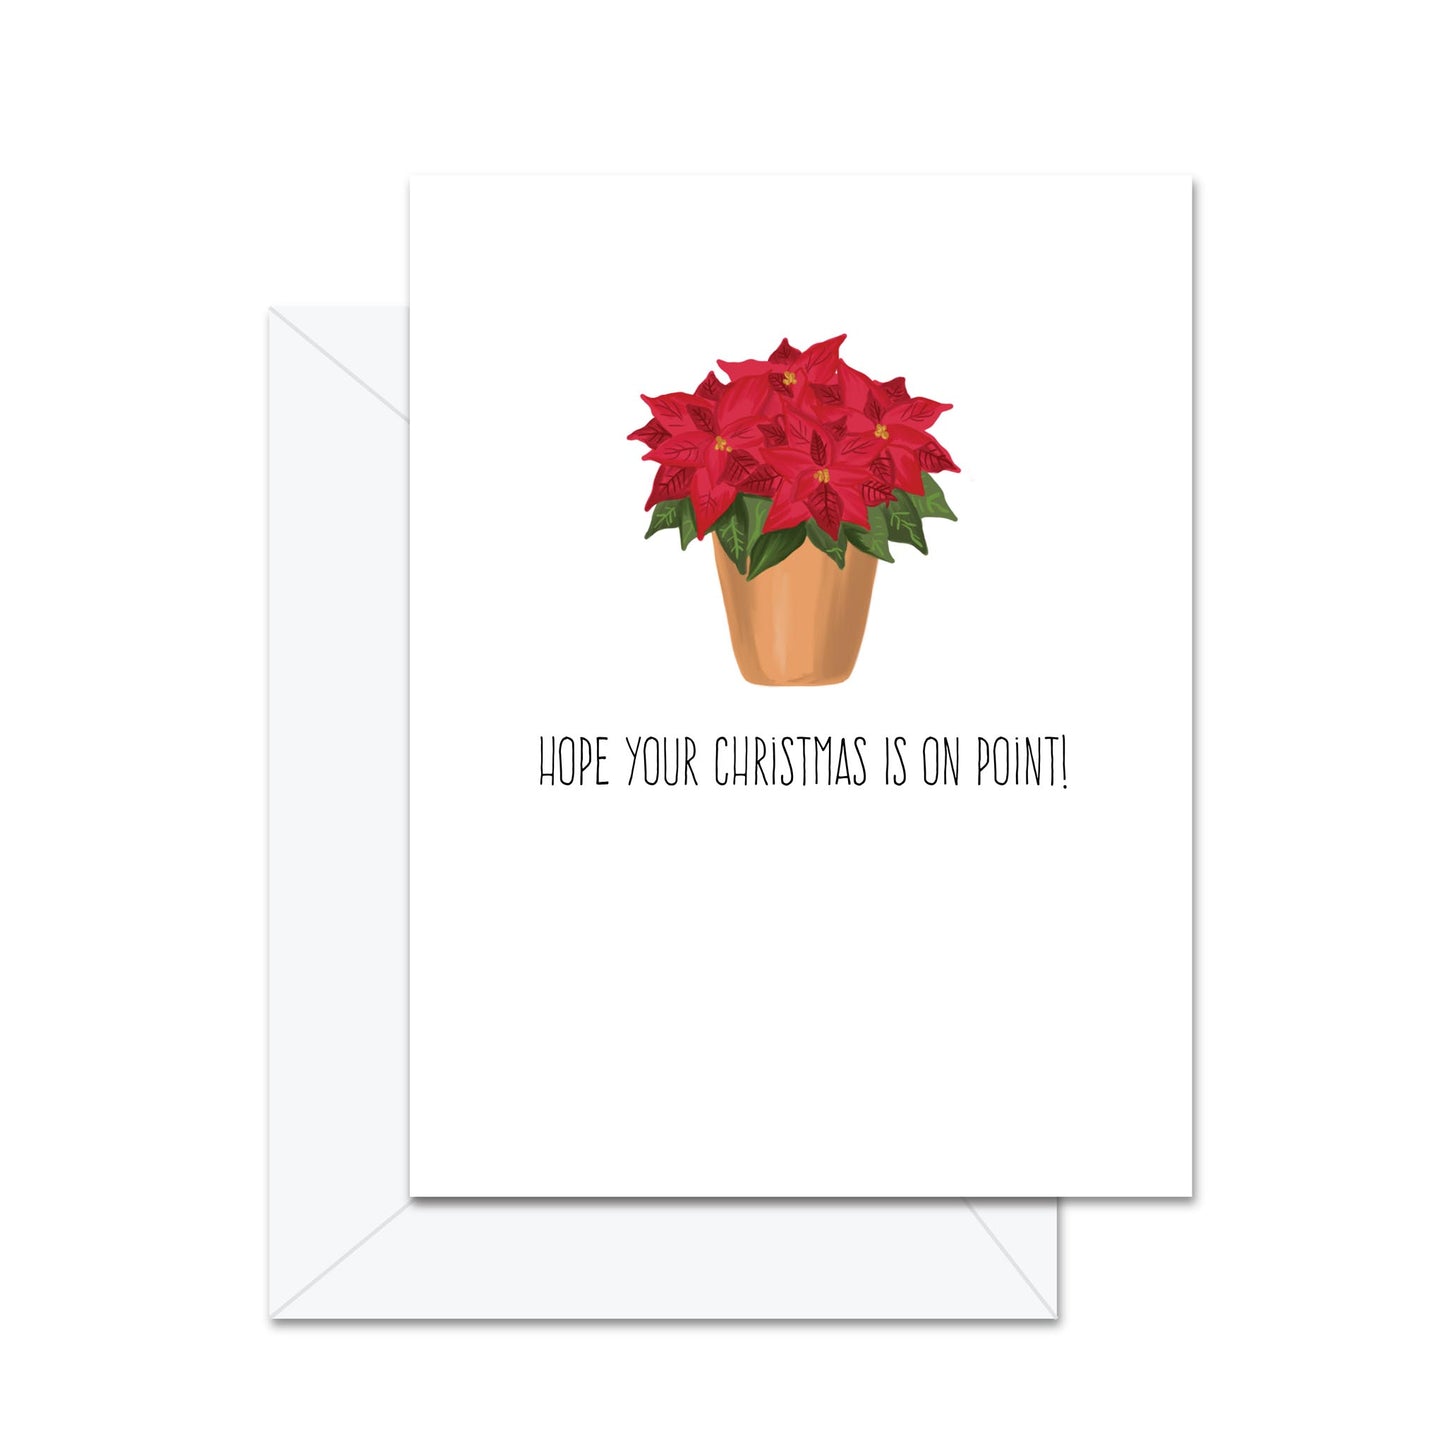 Hope Your Christmas Is On Point! - Greeting Card